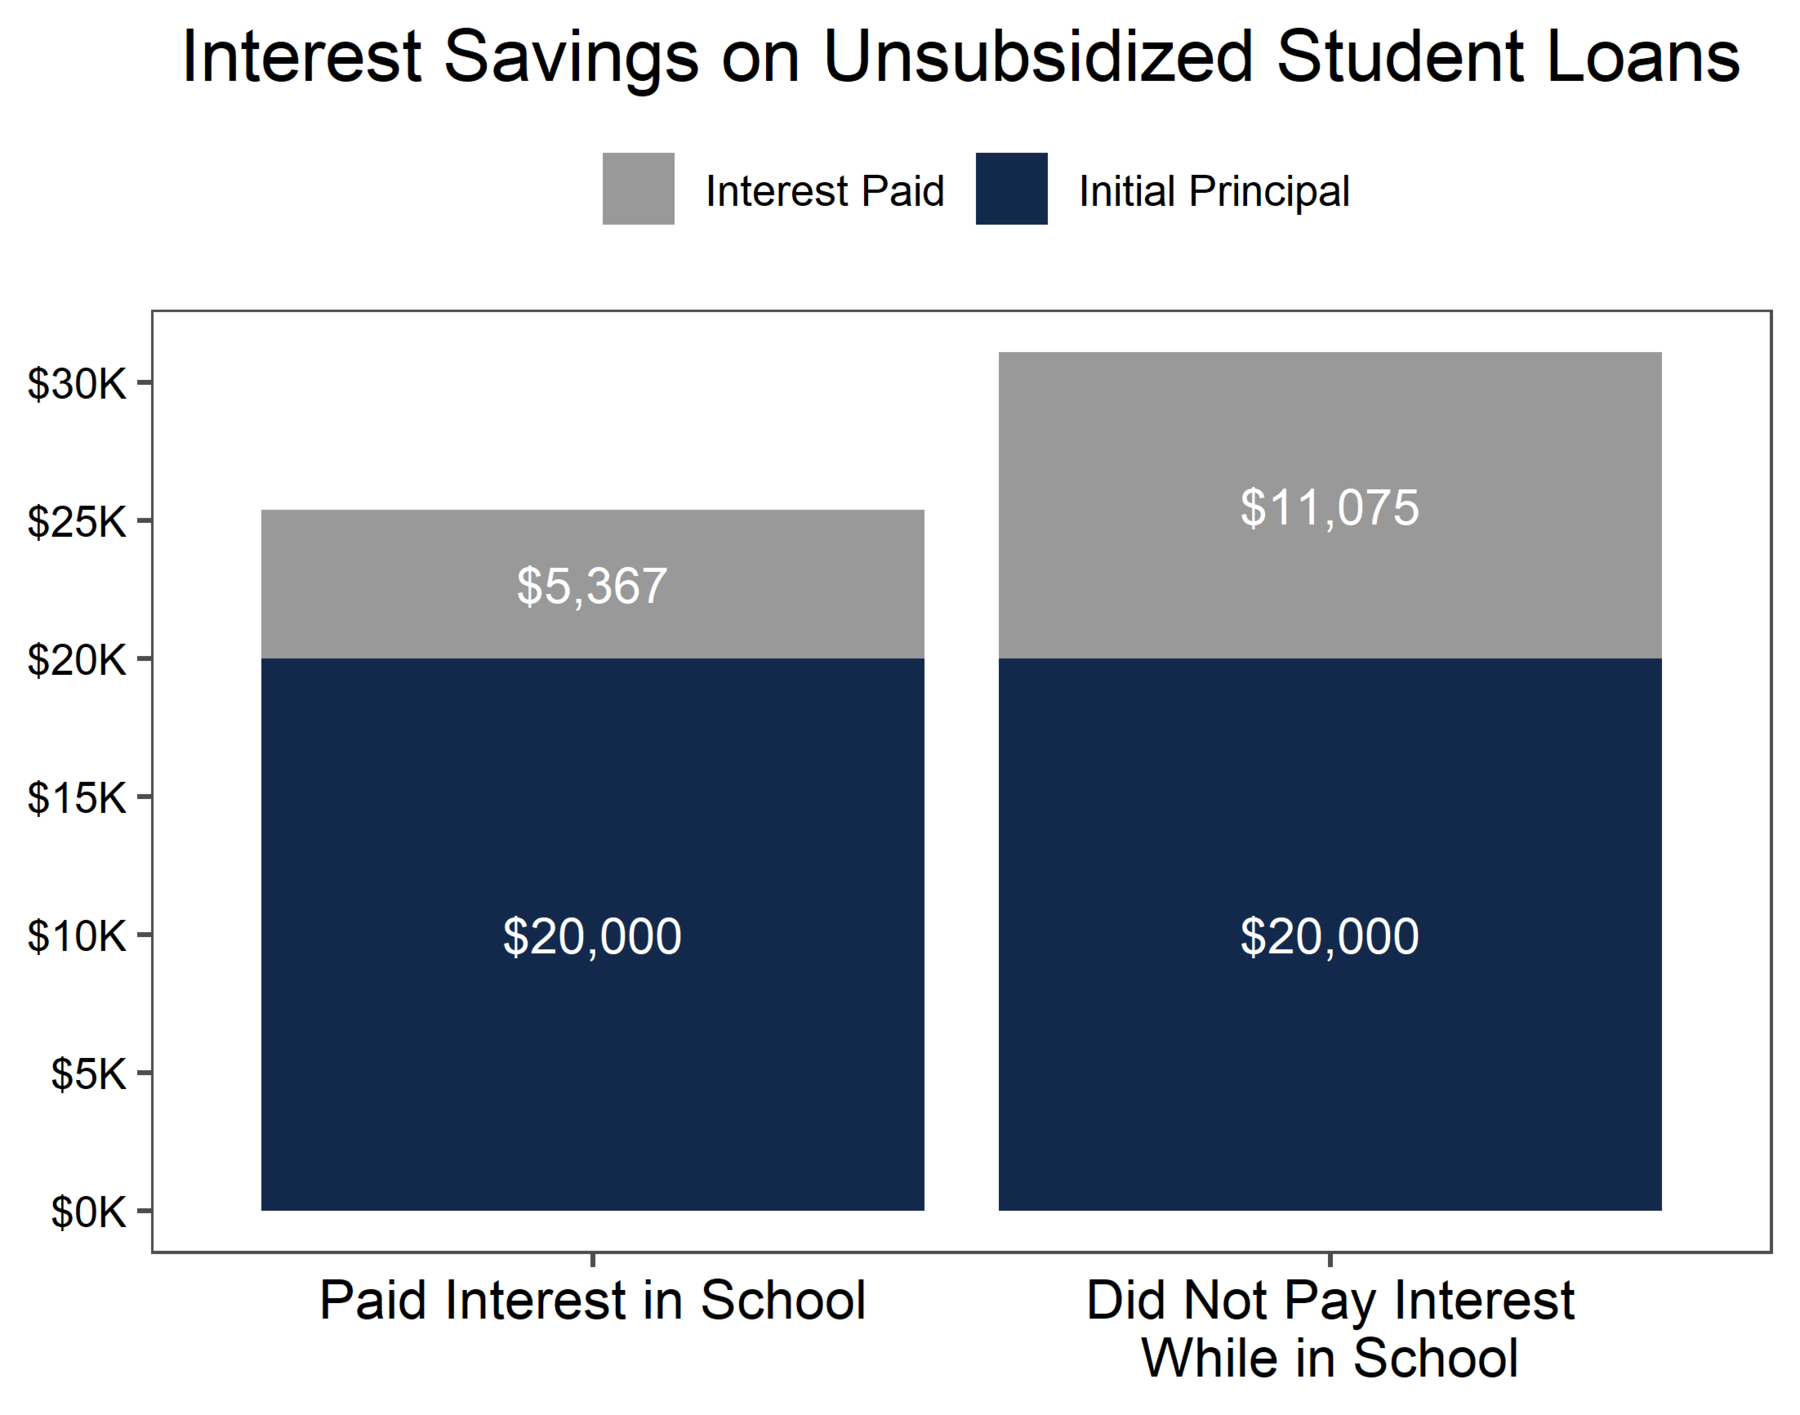 Graph comparing interest savings on unsubsidized student loans